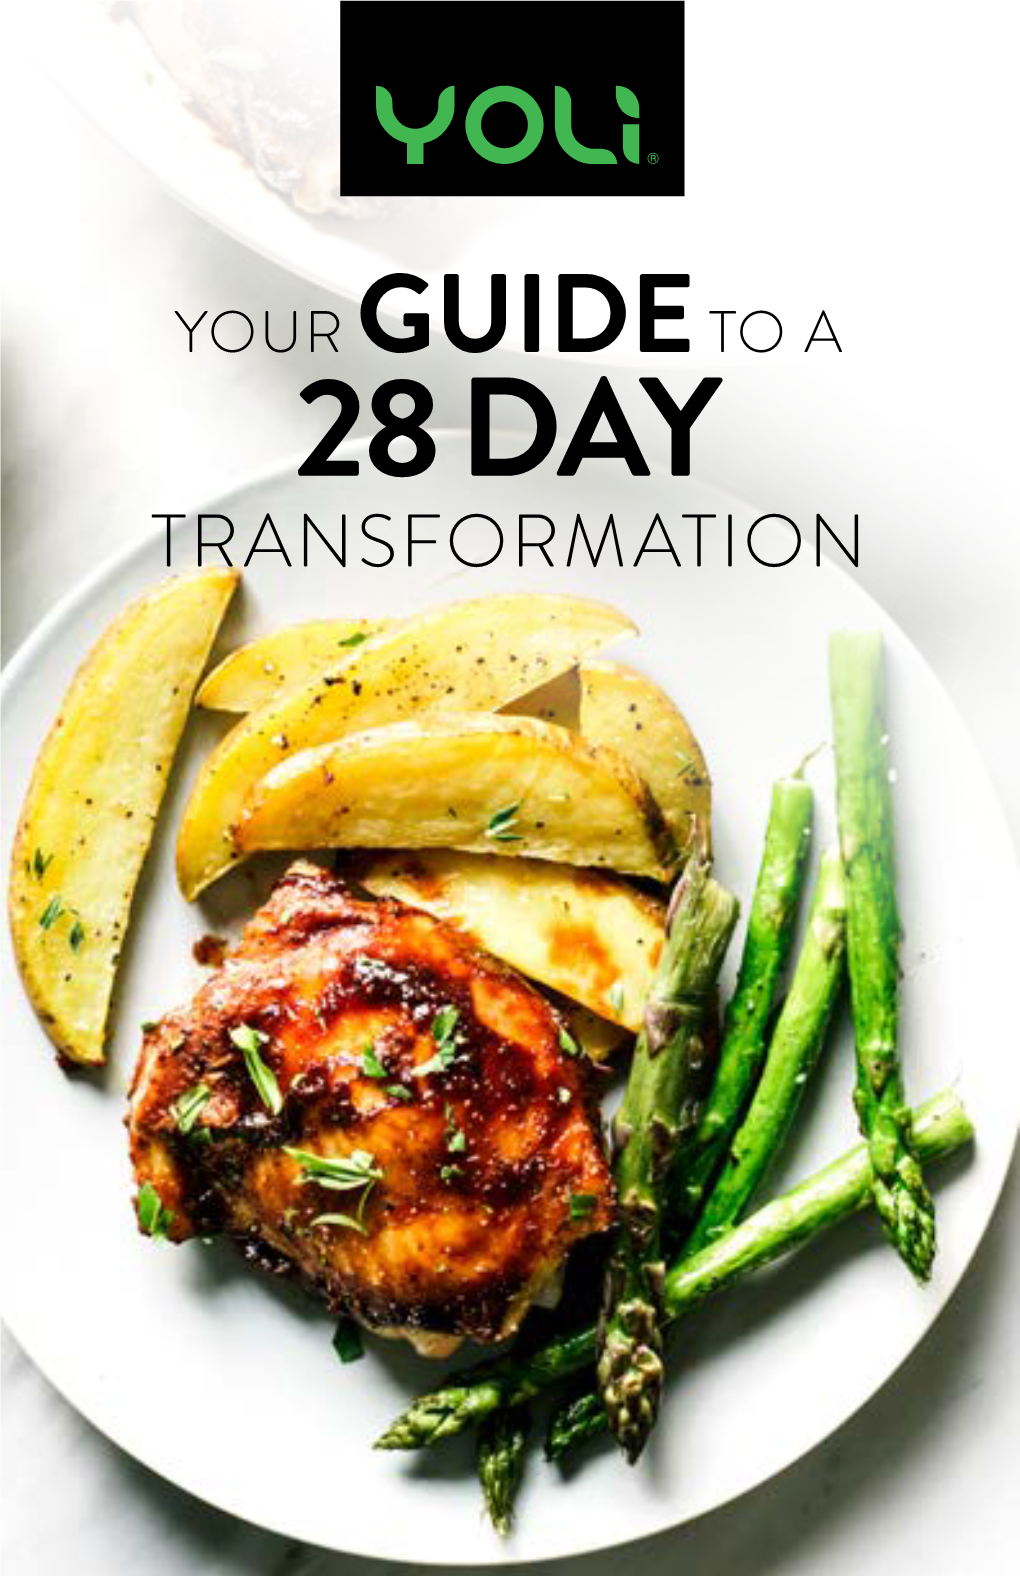 28 Day Transformation at Yoli, We Want You to Live, Grow, and Transform